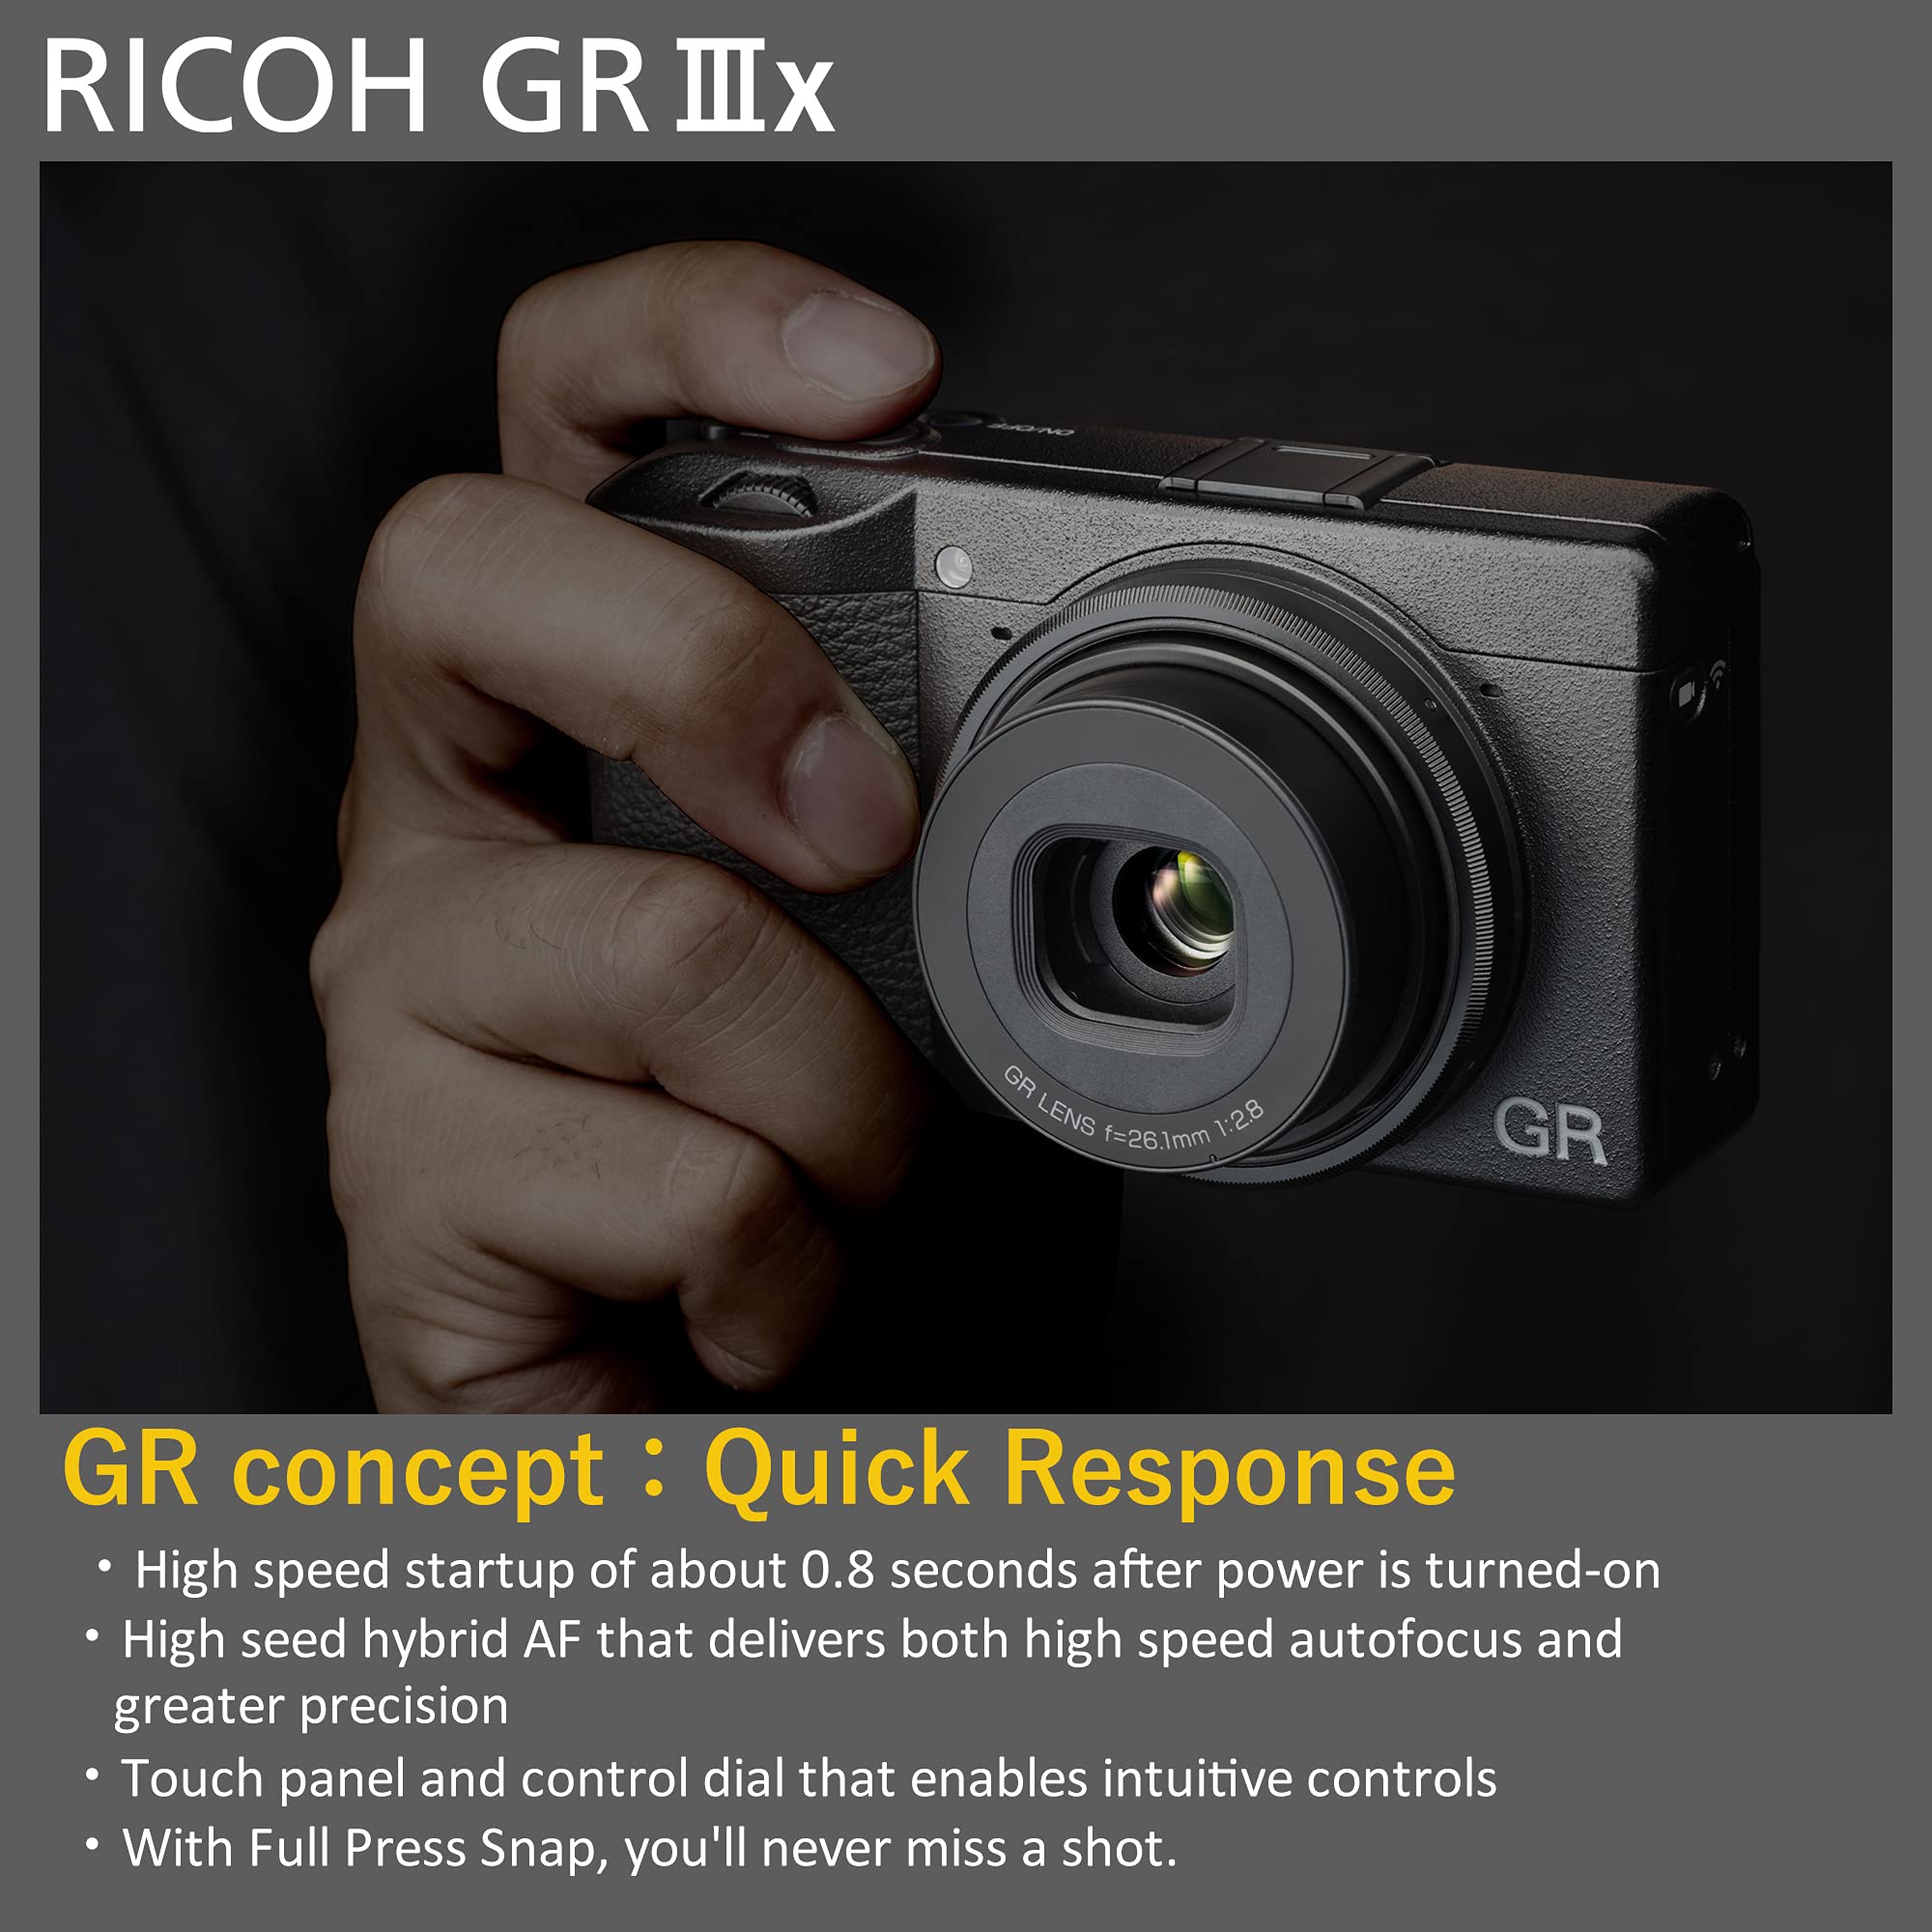 Ricoh GR IIIx Digital Camera [Focal length 40mm] [Equipped with24.2M APS-C size large CMOS sensor ] [The ultimate snapshot camera] [Approximately 0.8 seconds high-speed startup] [High speed hybrid AF]